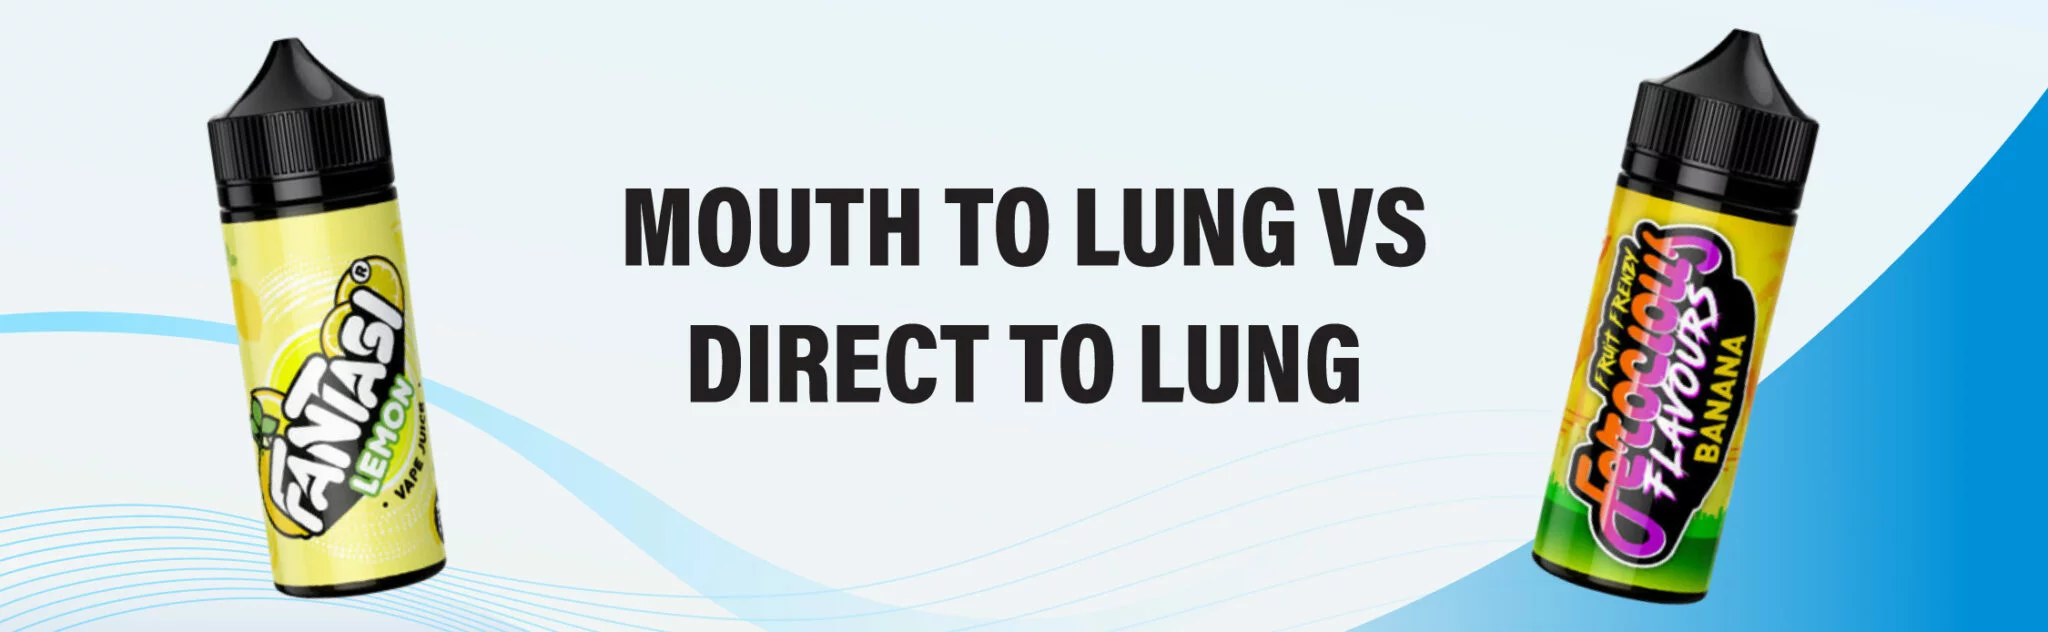 mouth to lung vs direct to lung